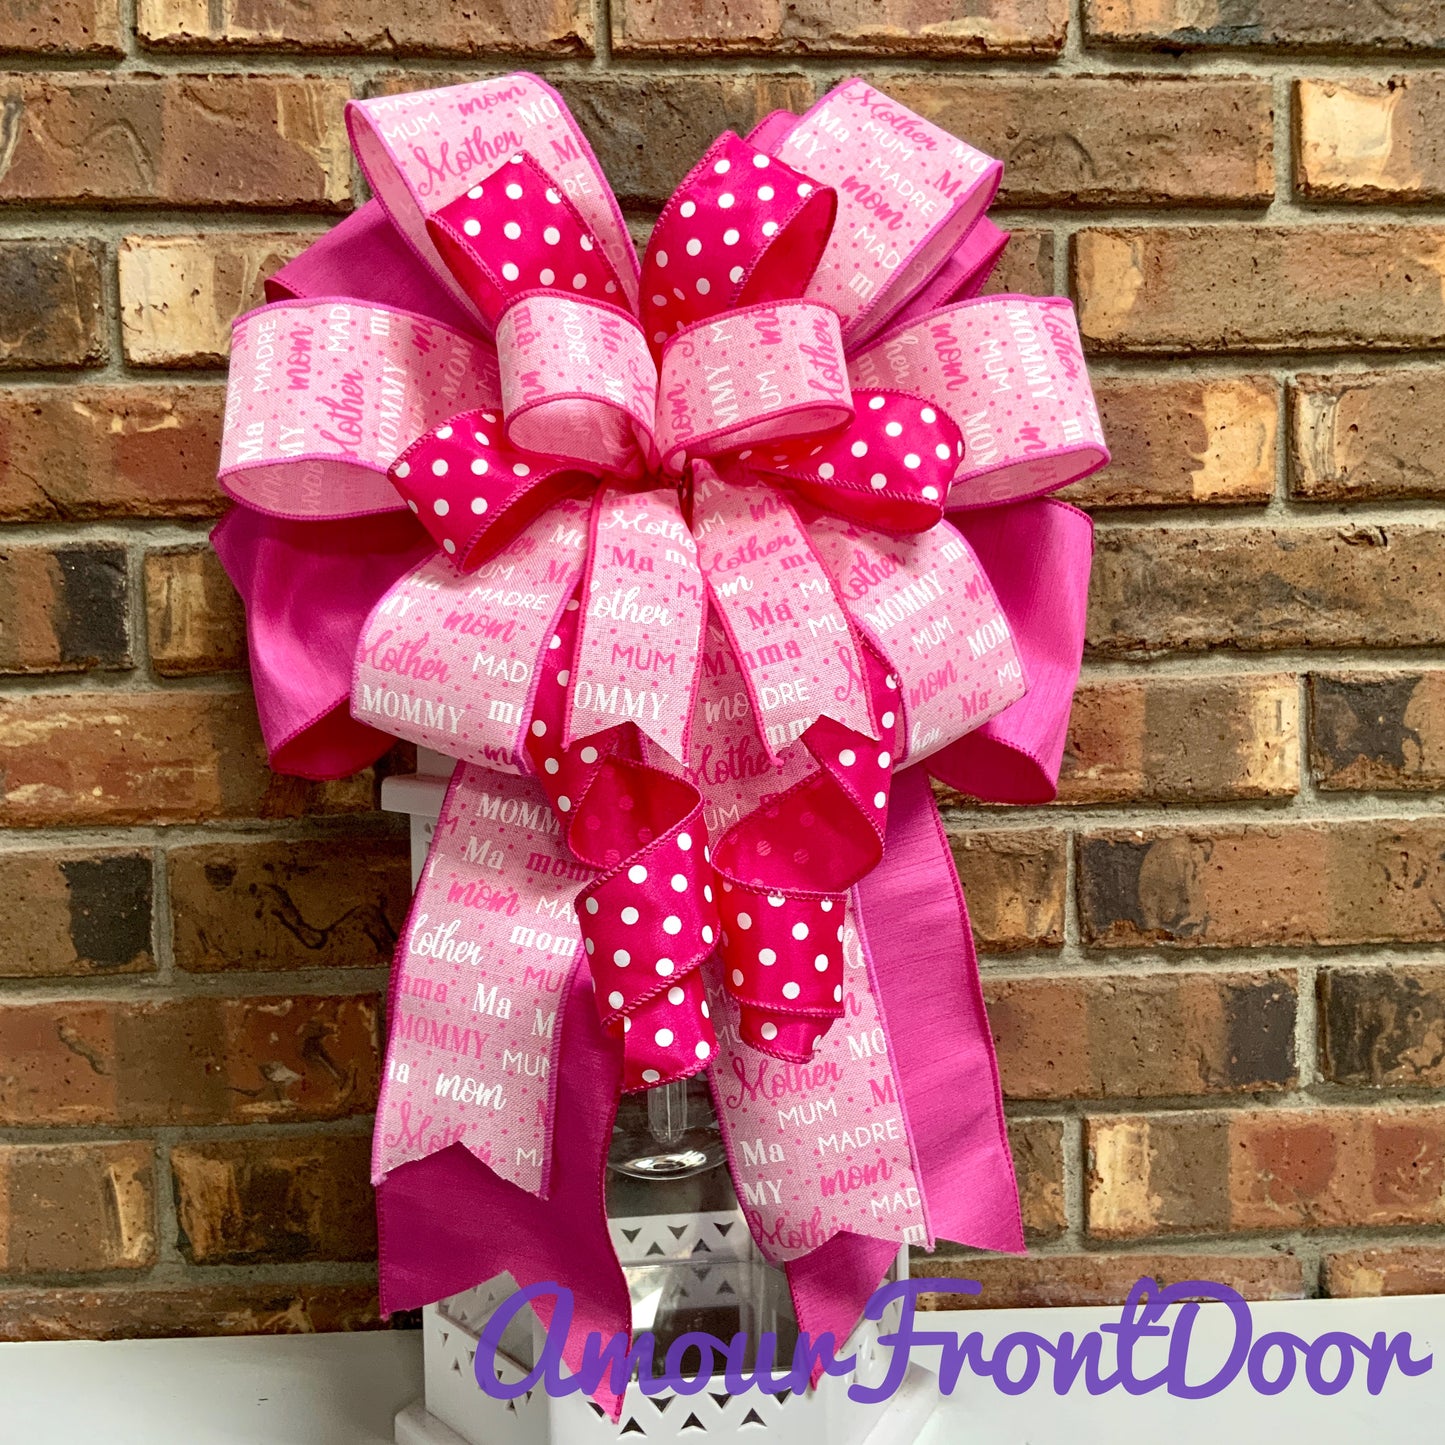 Mother's Day Bow, Mother's Day Decor, Mom Lantern Bow, Mom Mailbox Decor, Mother Birthday Decor, Bow For Wreaths, Sconce Bow